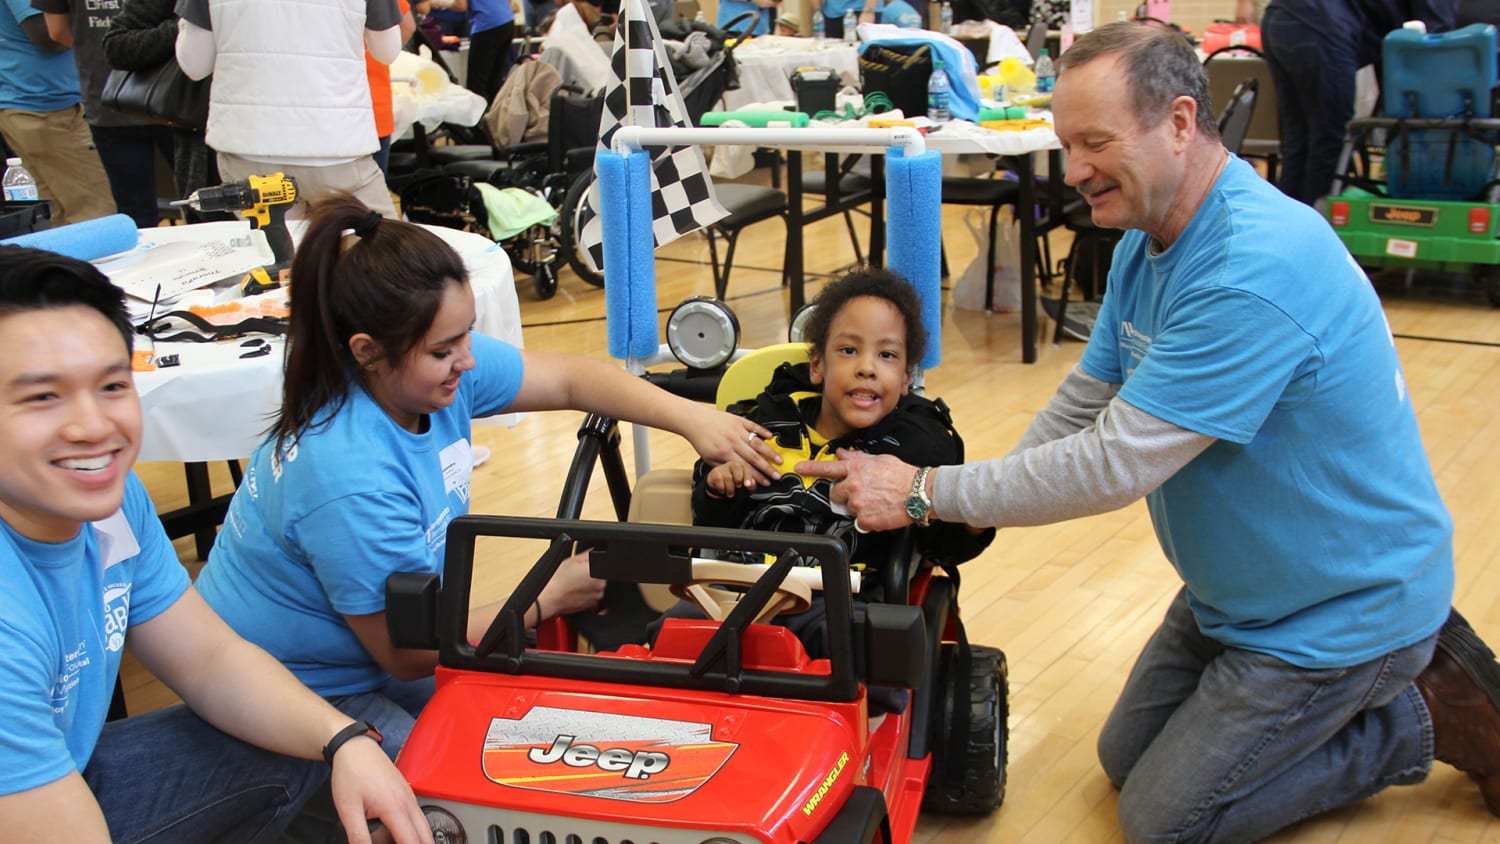 Gobabygo Gives Kids With Disabilities